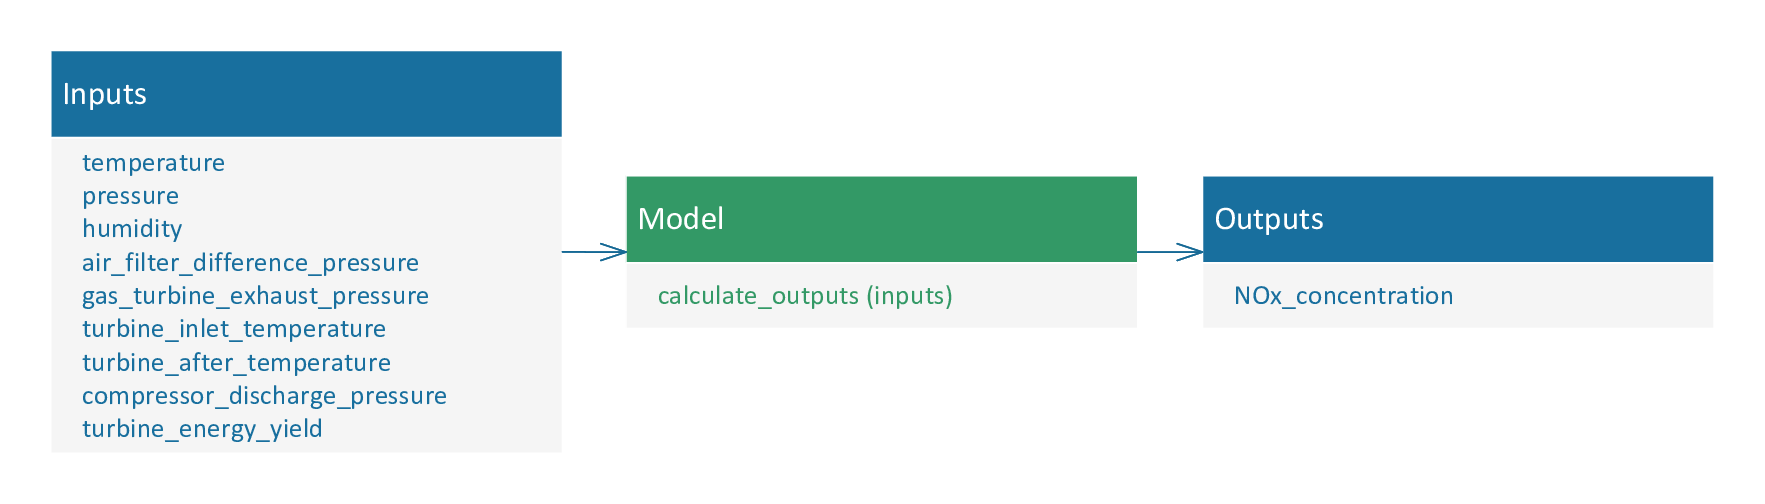 Classification follows the same pattern as the other machine learning models types: inputs, model, outputs. In this case, inputs are the variables of the dataset, model is calculate_outputs, and output is NOx_concentration.